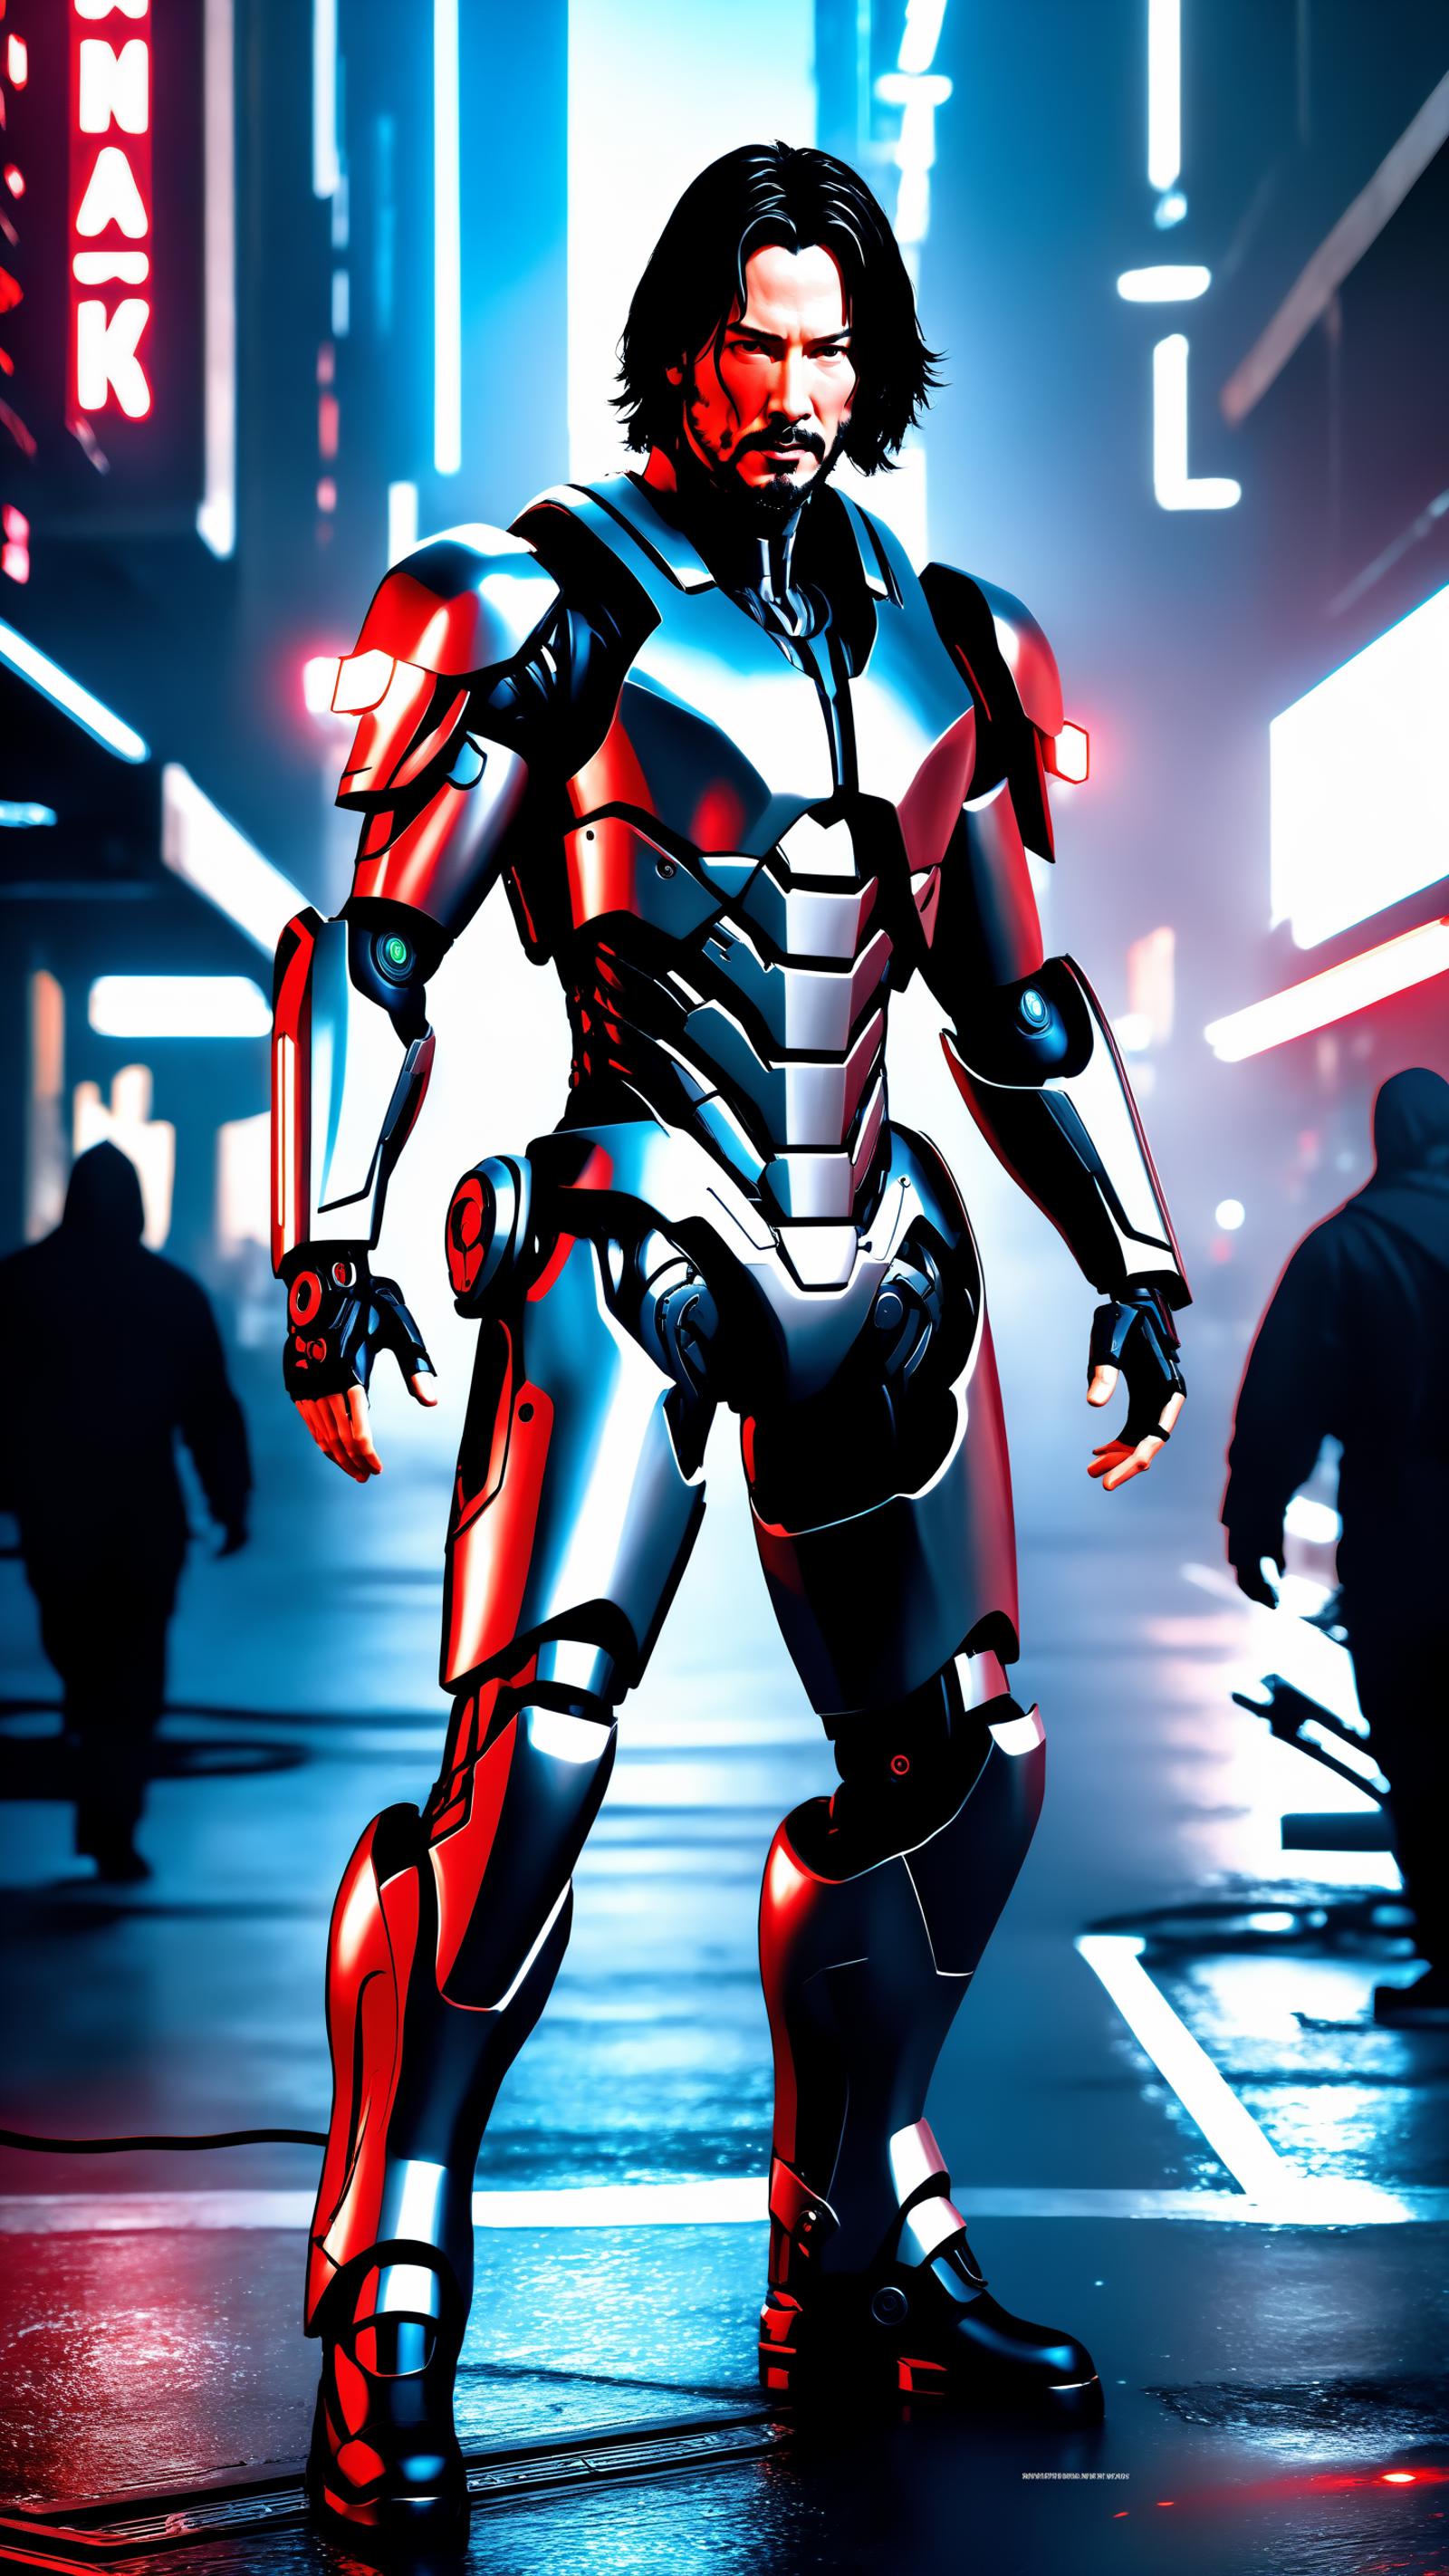 A robot with red and silver armor walking in a city at night.